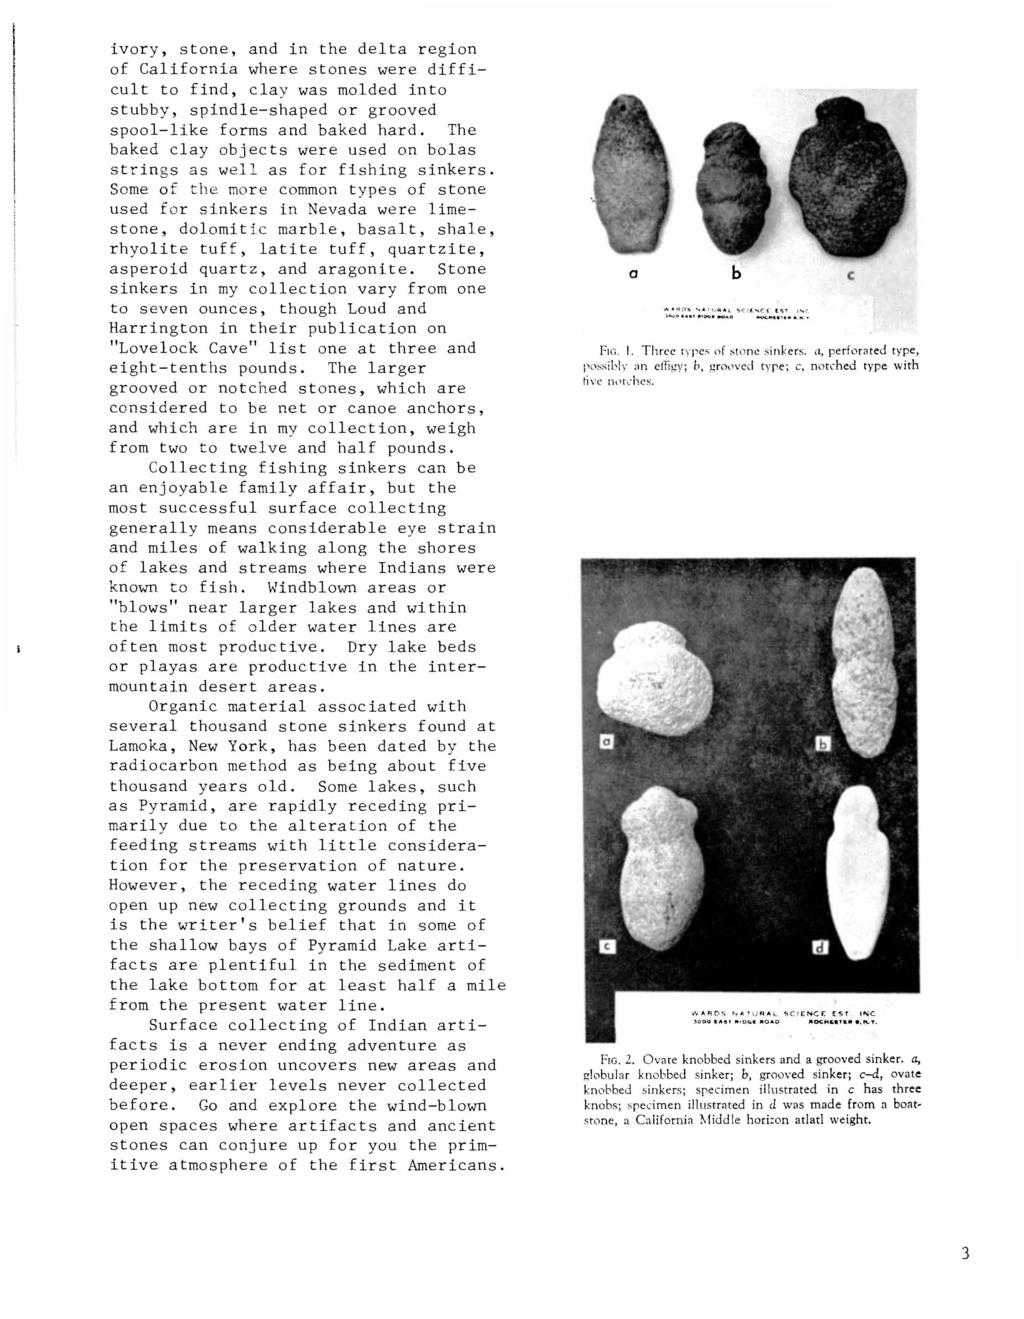 ivory, stone, and in the delta region of California where stones were difficult to find, clay was molded into stubby, spindle-shaped or grooved spool-like forms and baked hard.